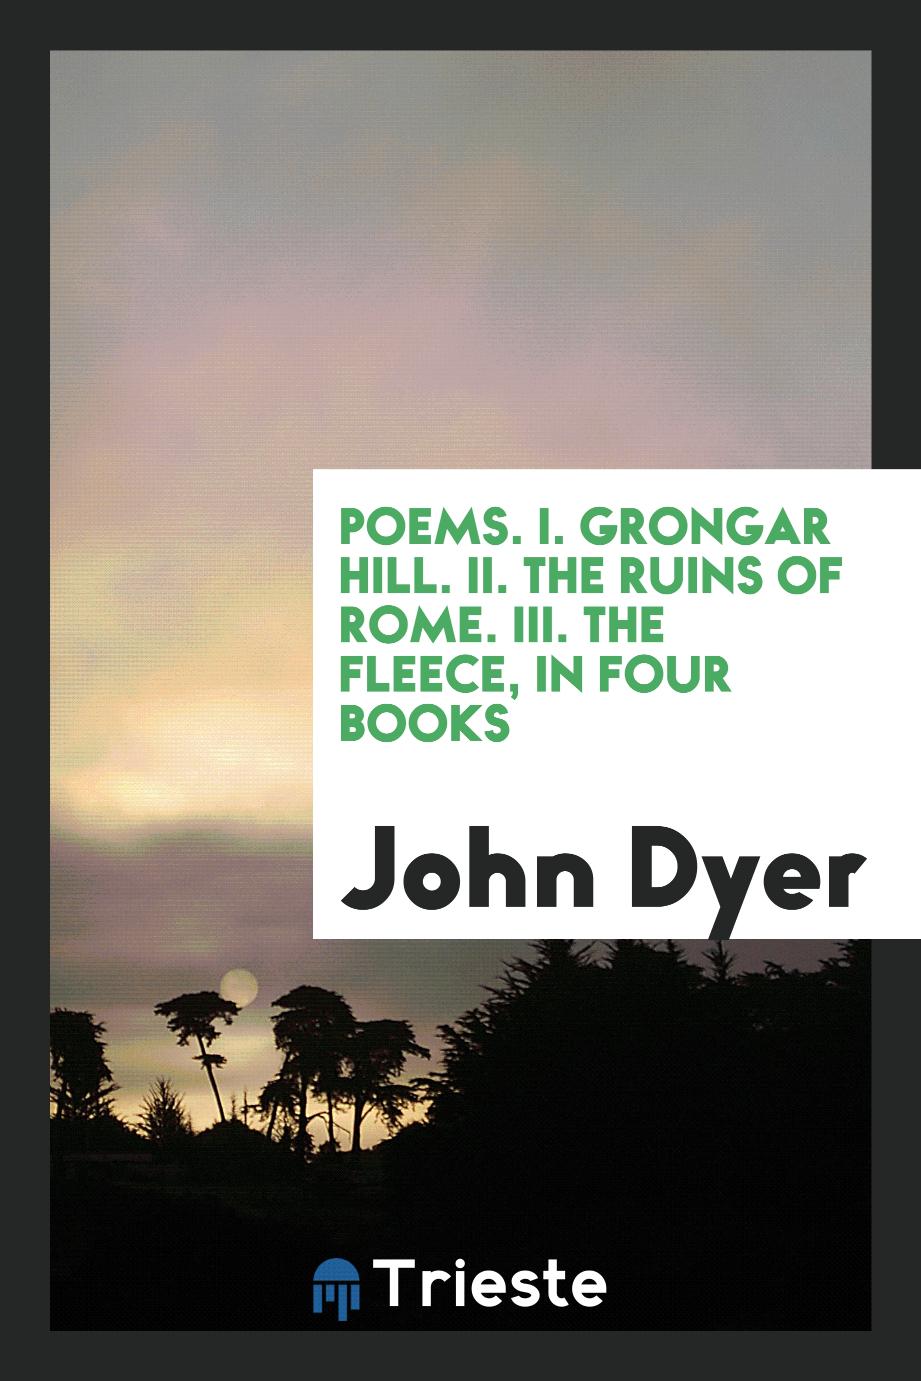 Poems. I. Grongar Hill. II. The Ruins of Rome. III. The Fleece, in Four Books